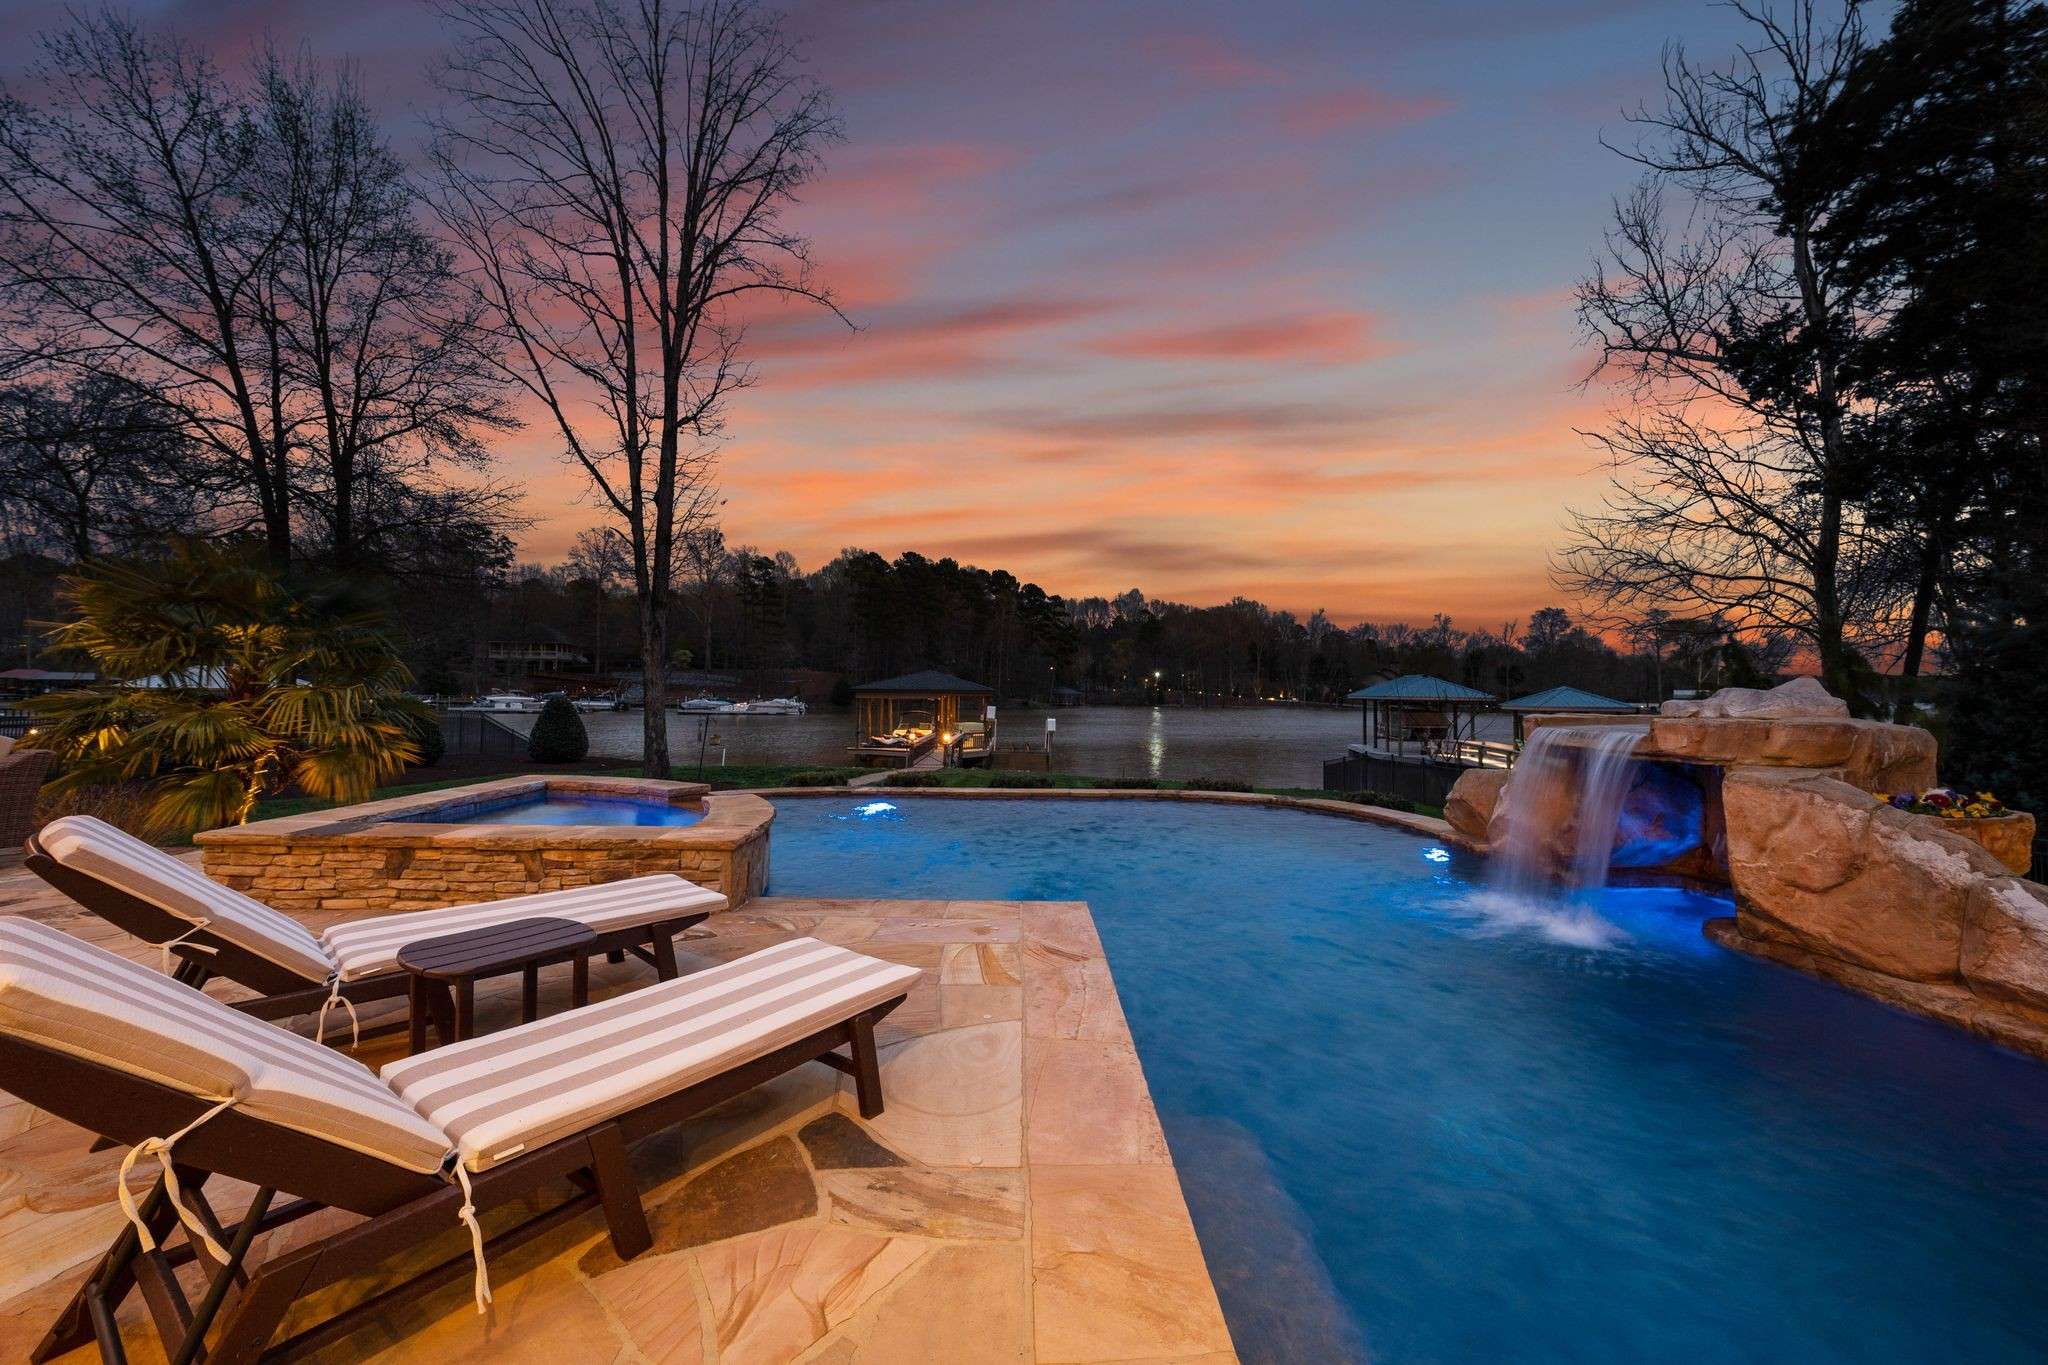 65 of 79. Exterior Twilight Photo - 846 Armstrong Rd - Overlooking Pool and waterfall